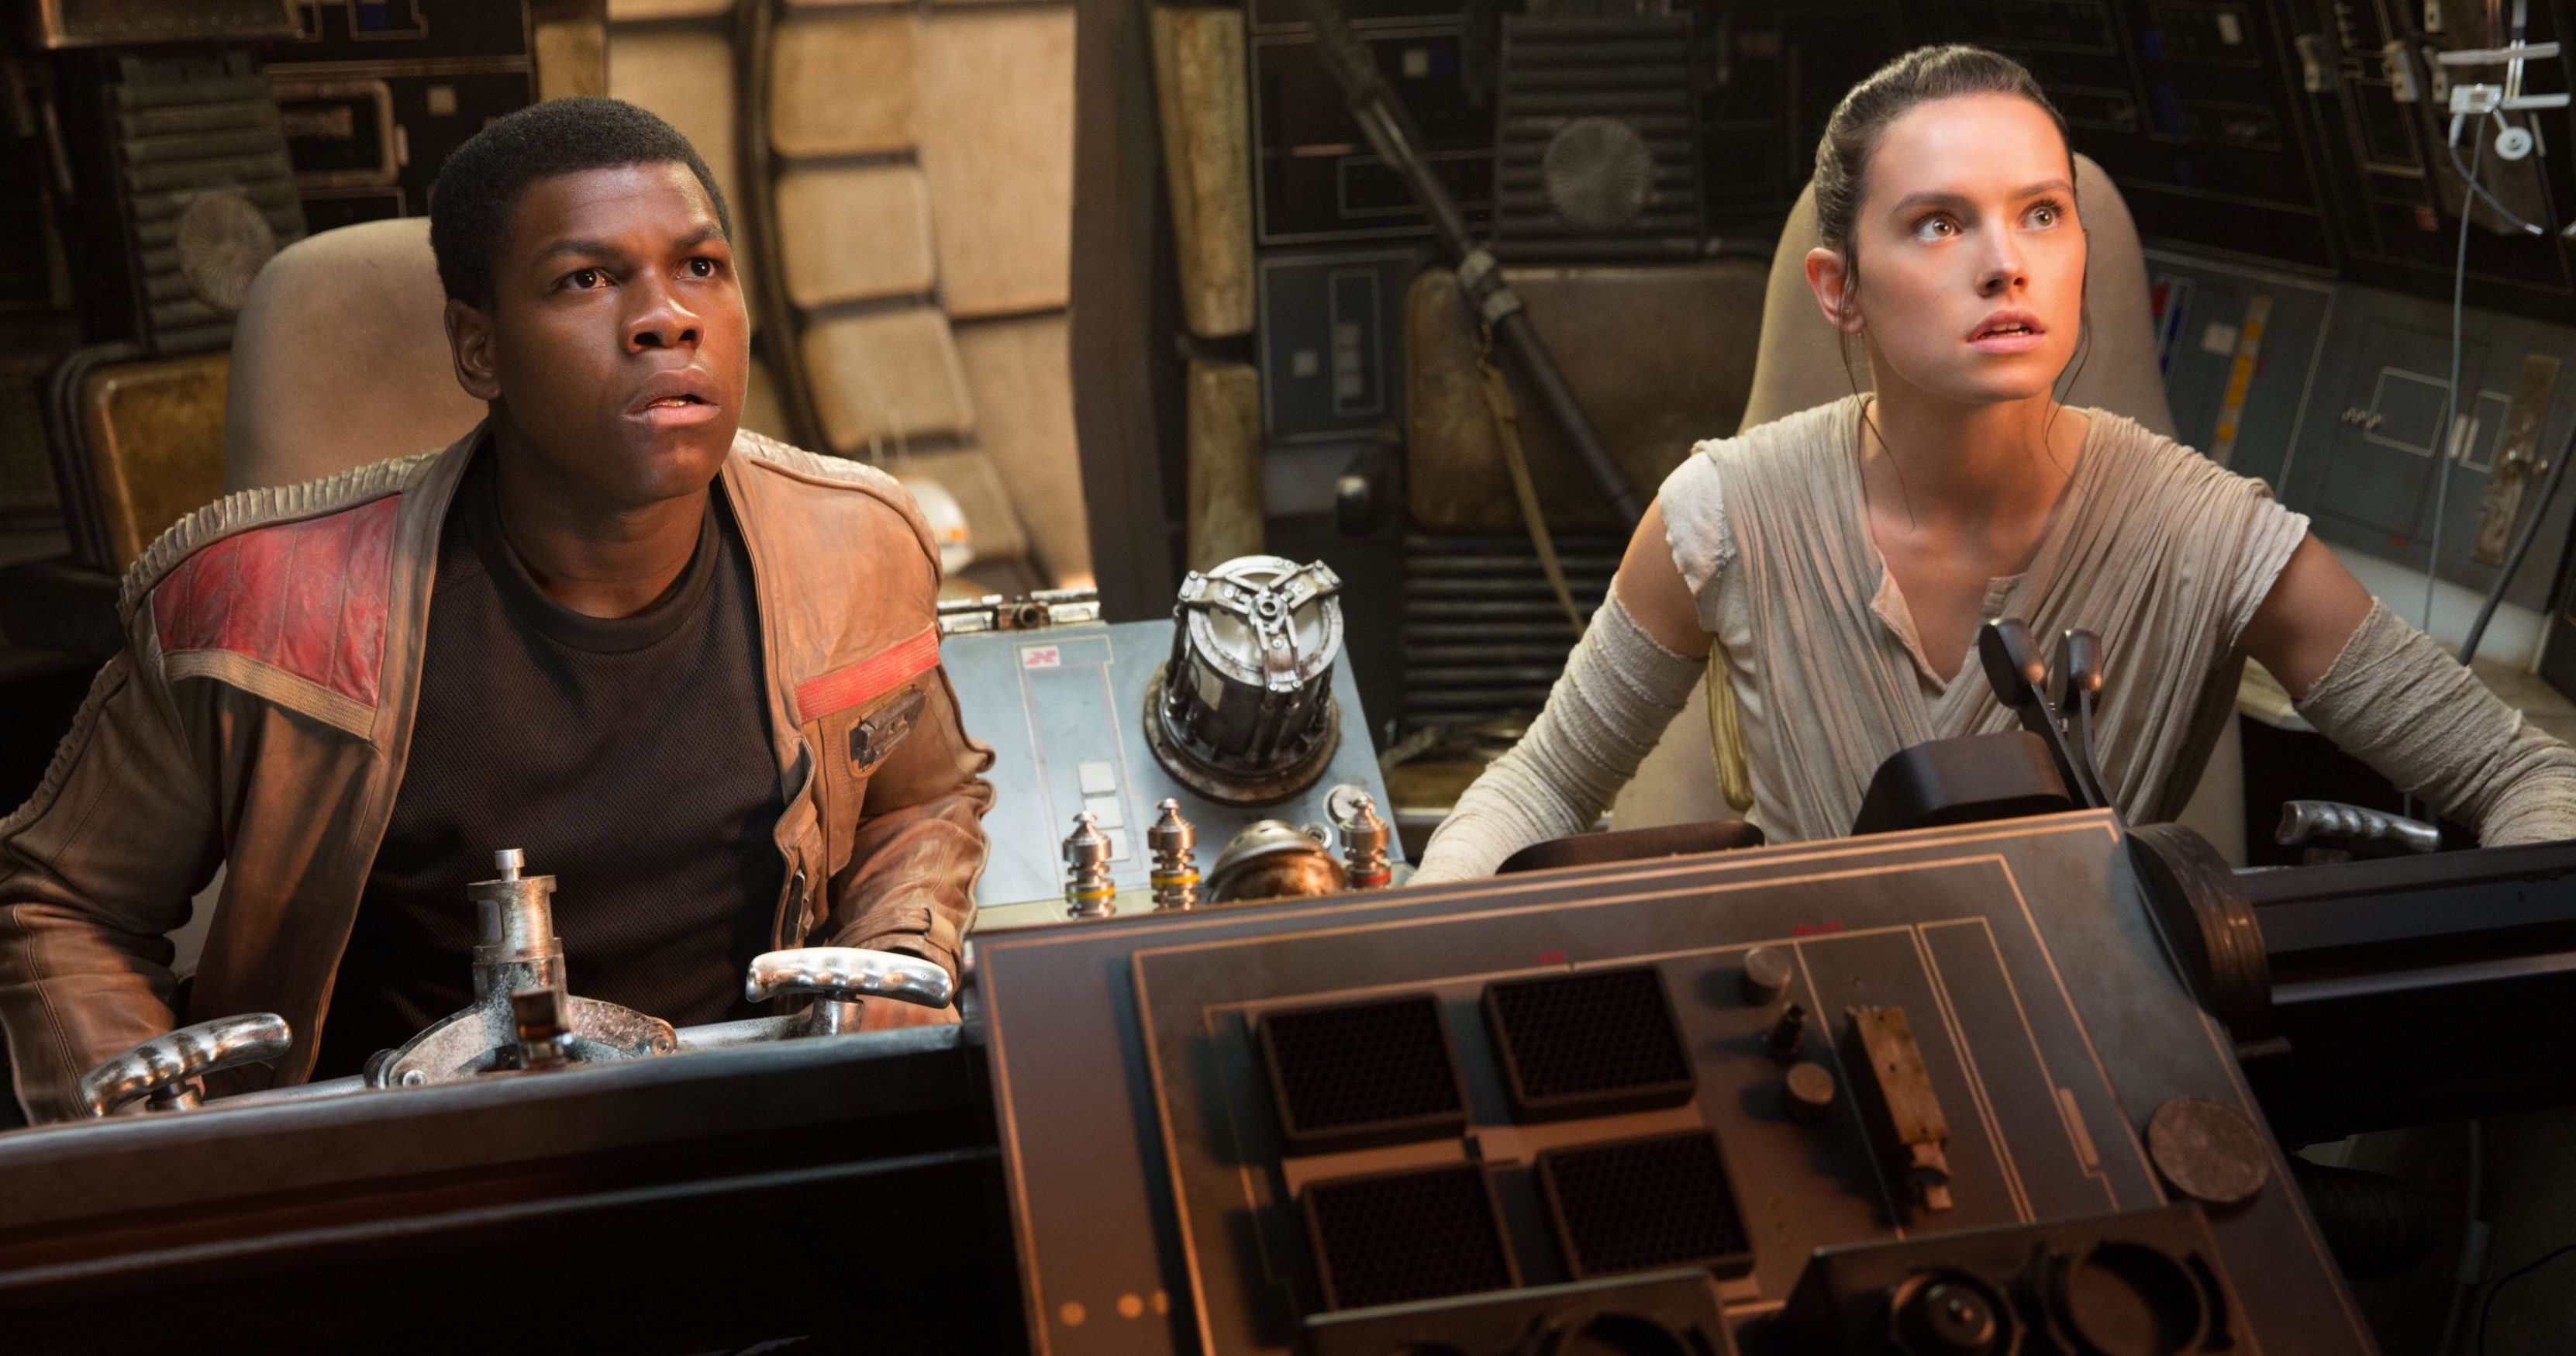 The Force Awakens Book Author Had to Remove Any Hint at Rey &amp; Finn Romance